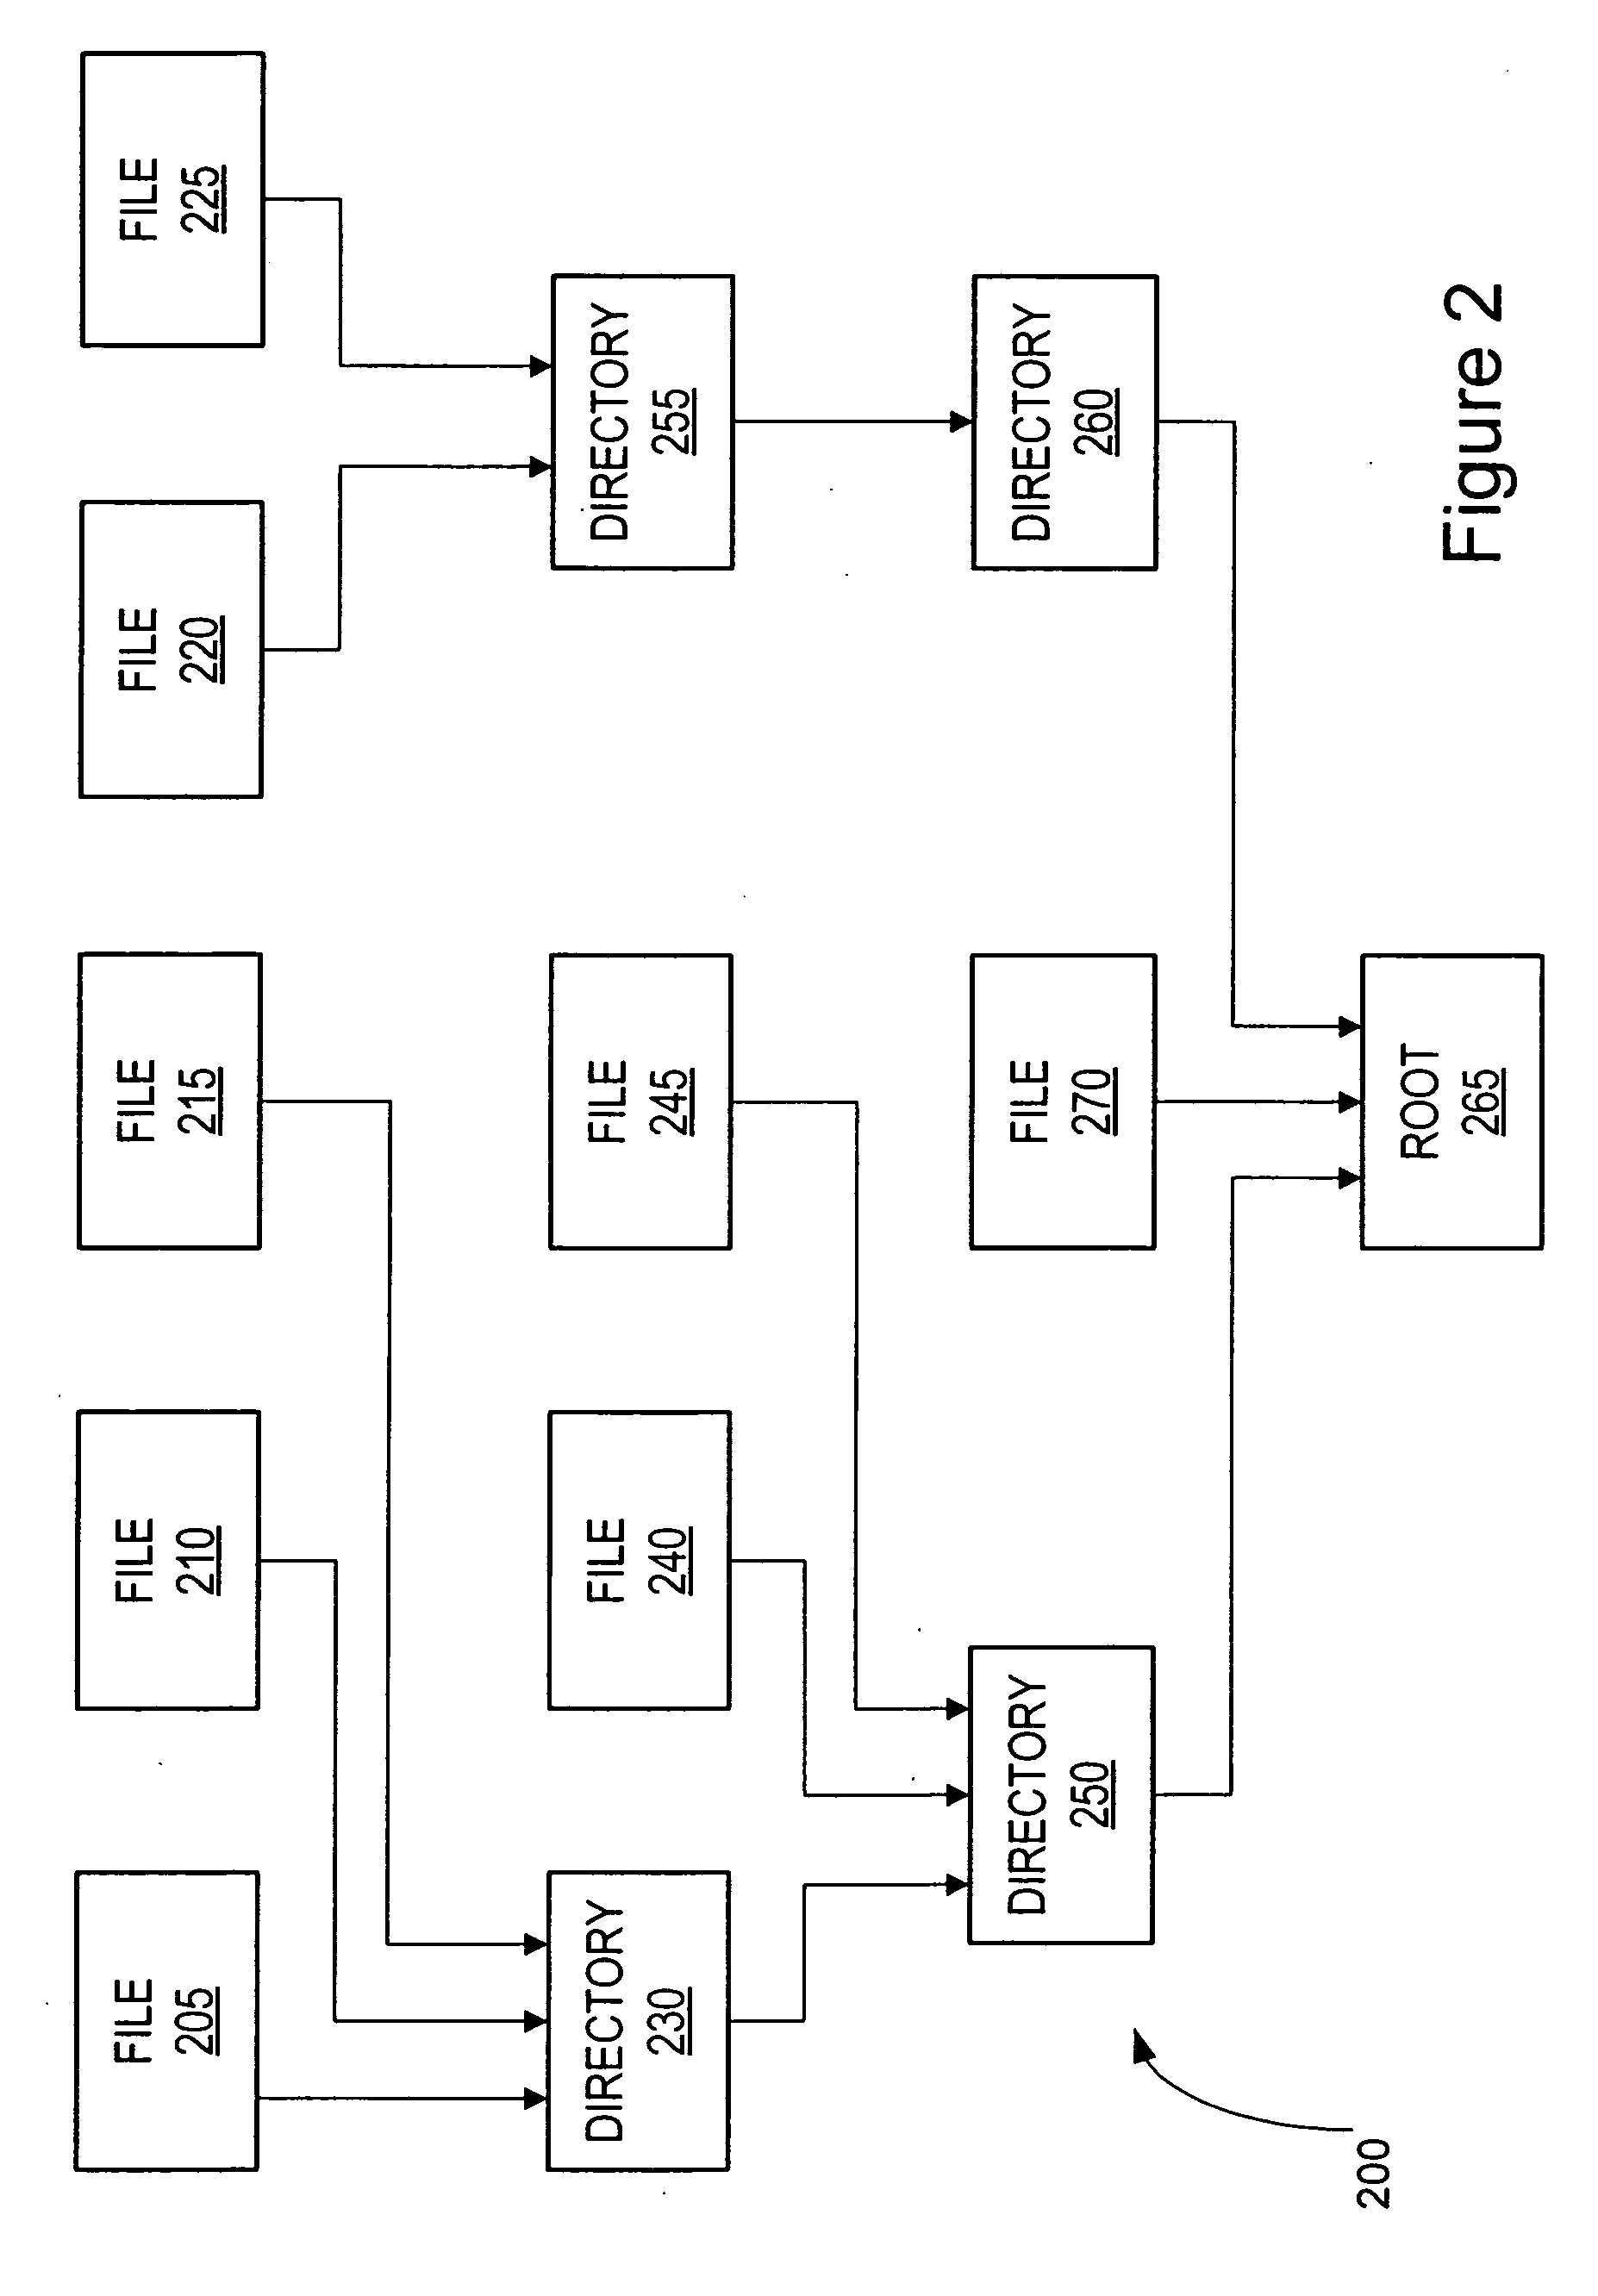 File system having transaction record coalescing